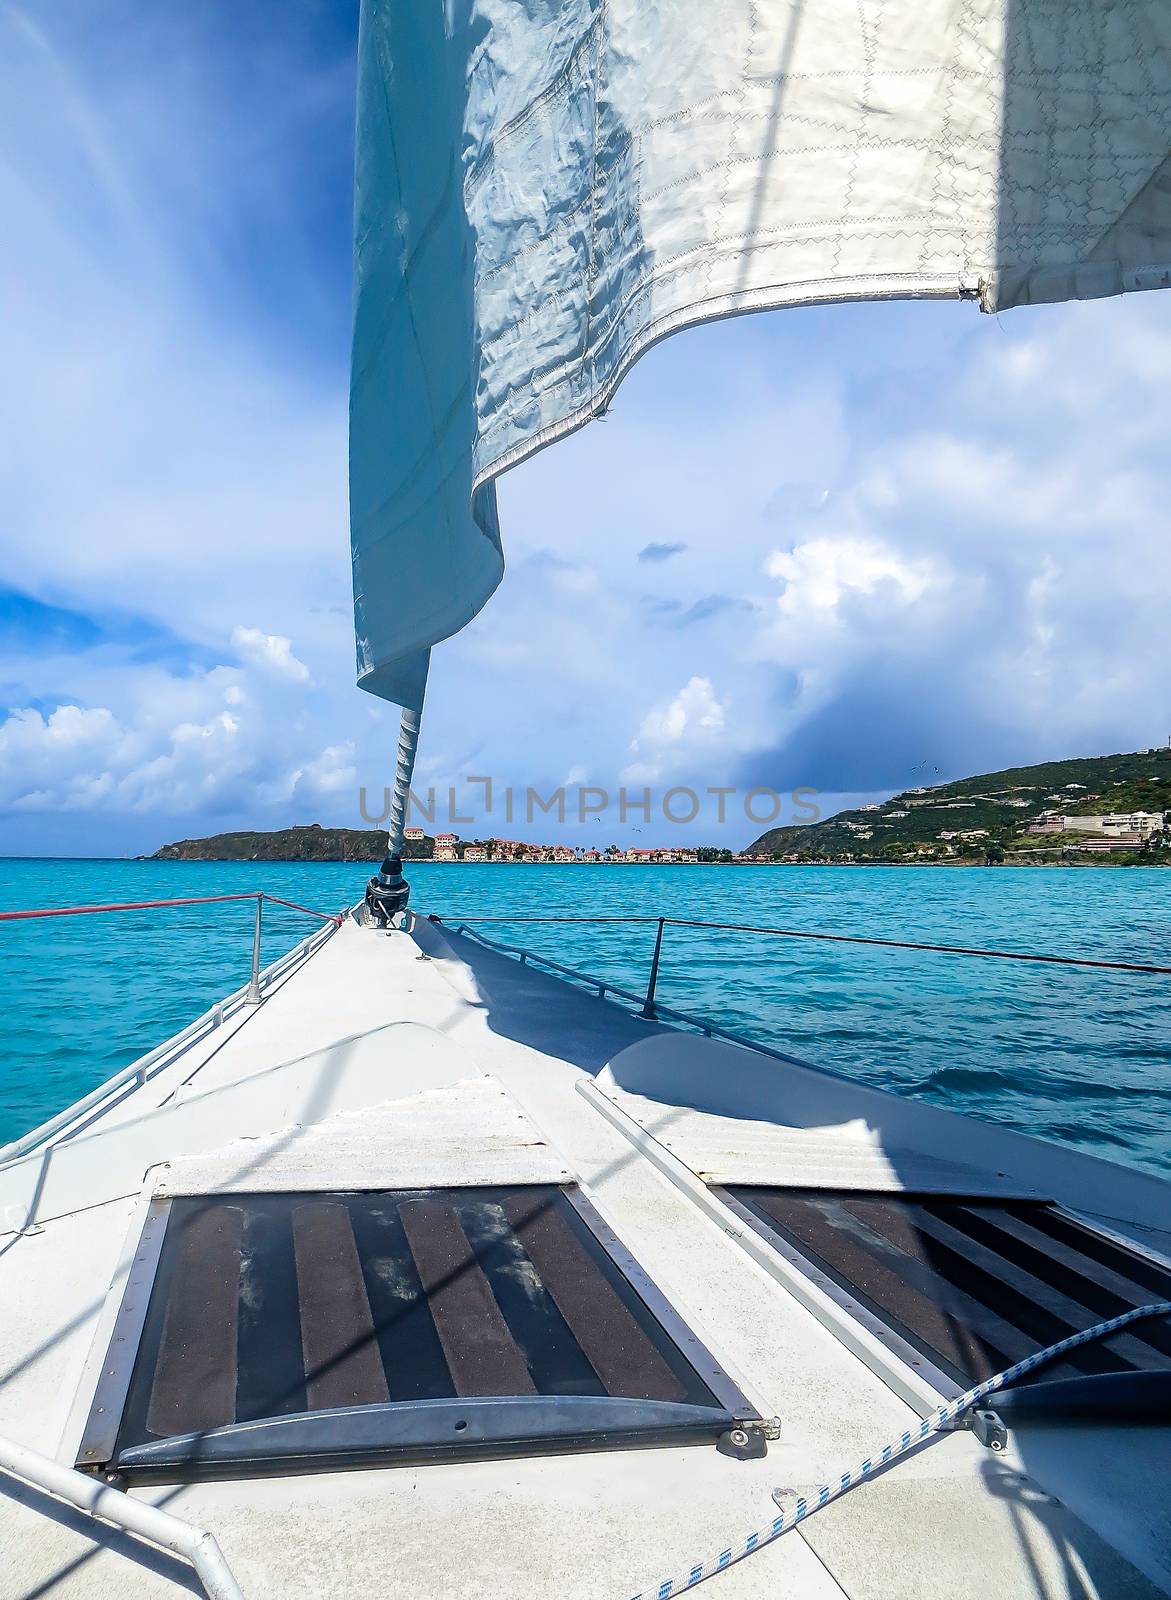 Sailing off the coast of St. Maarten in the Caribbean.